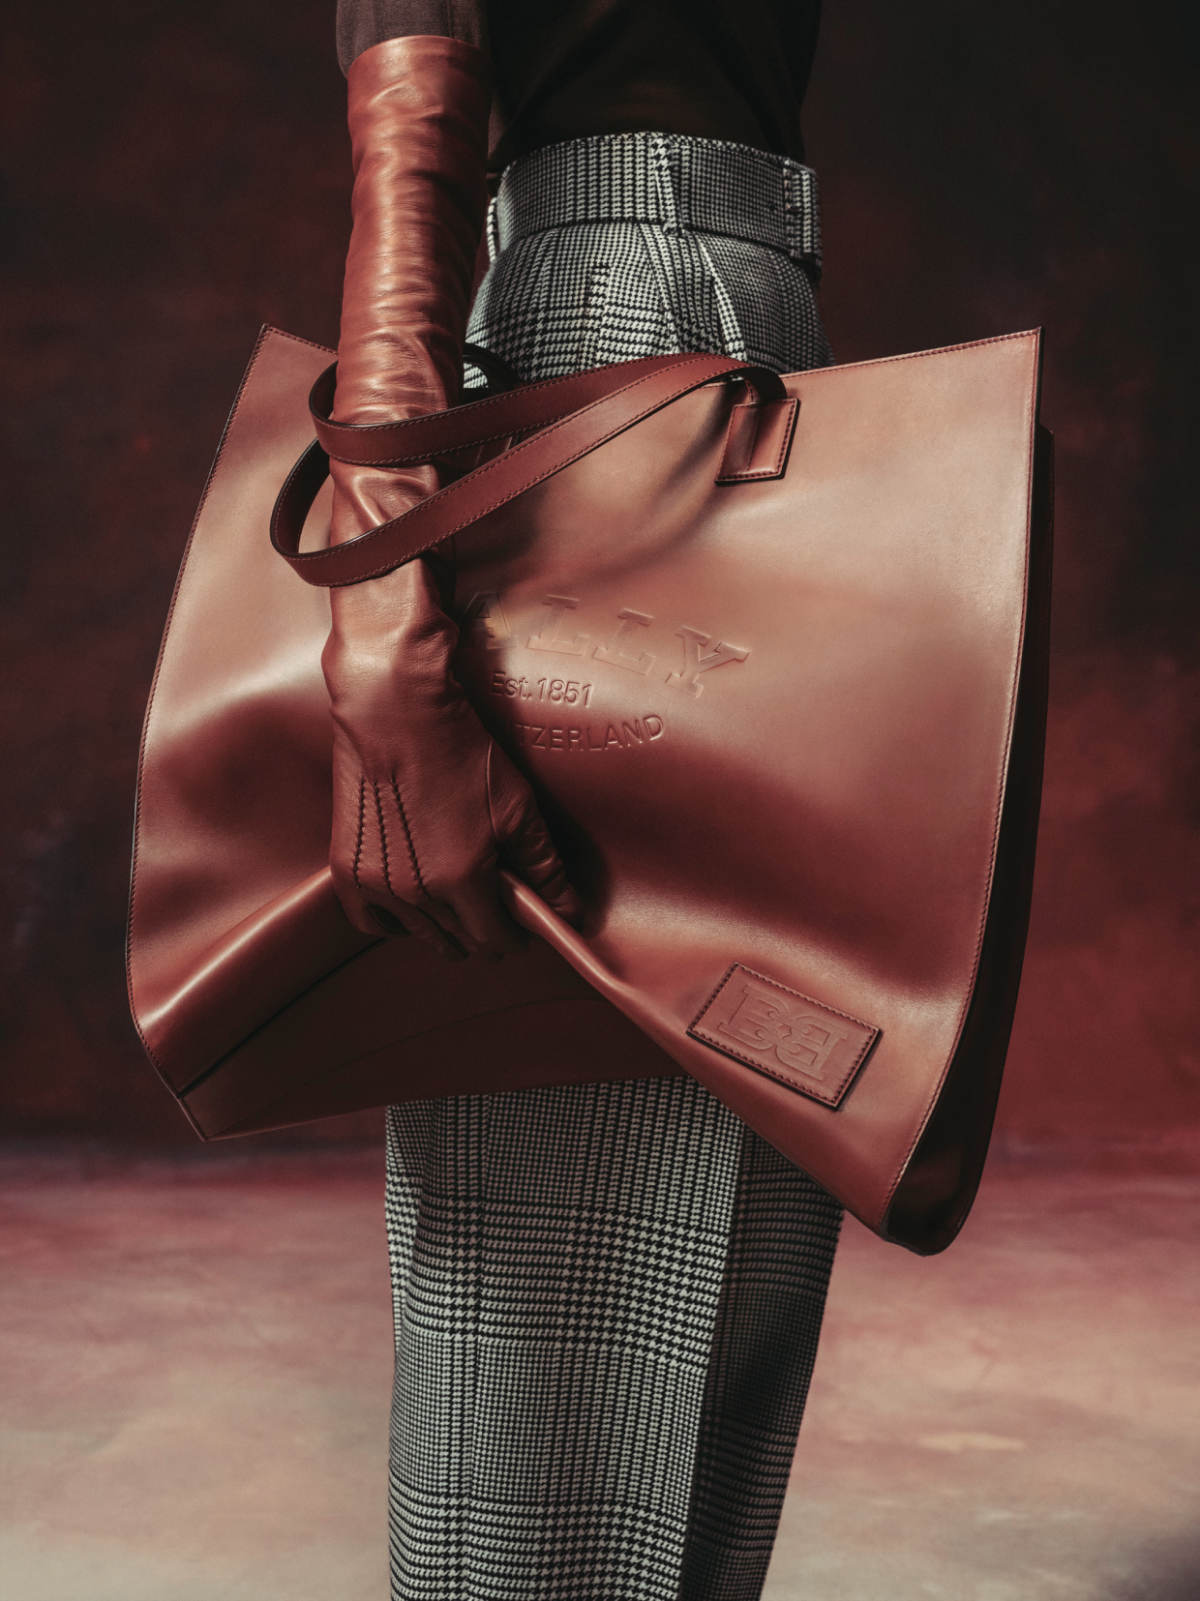 Reimagining Red: Bally’s Signature Color For The New Season